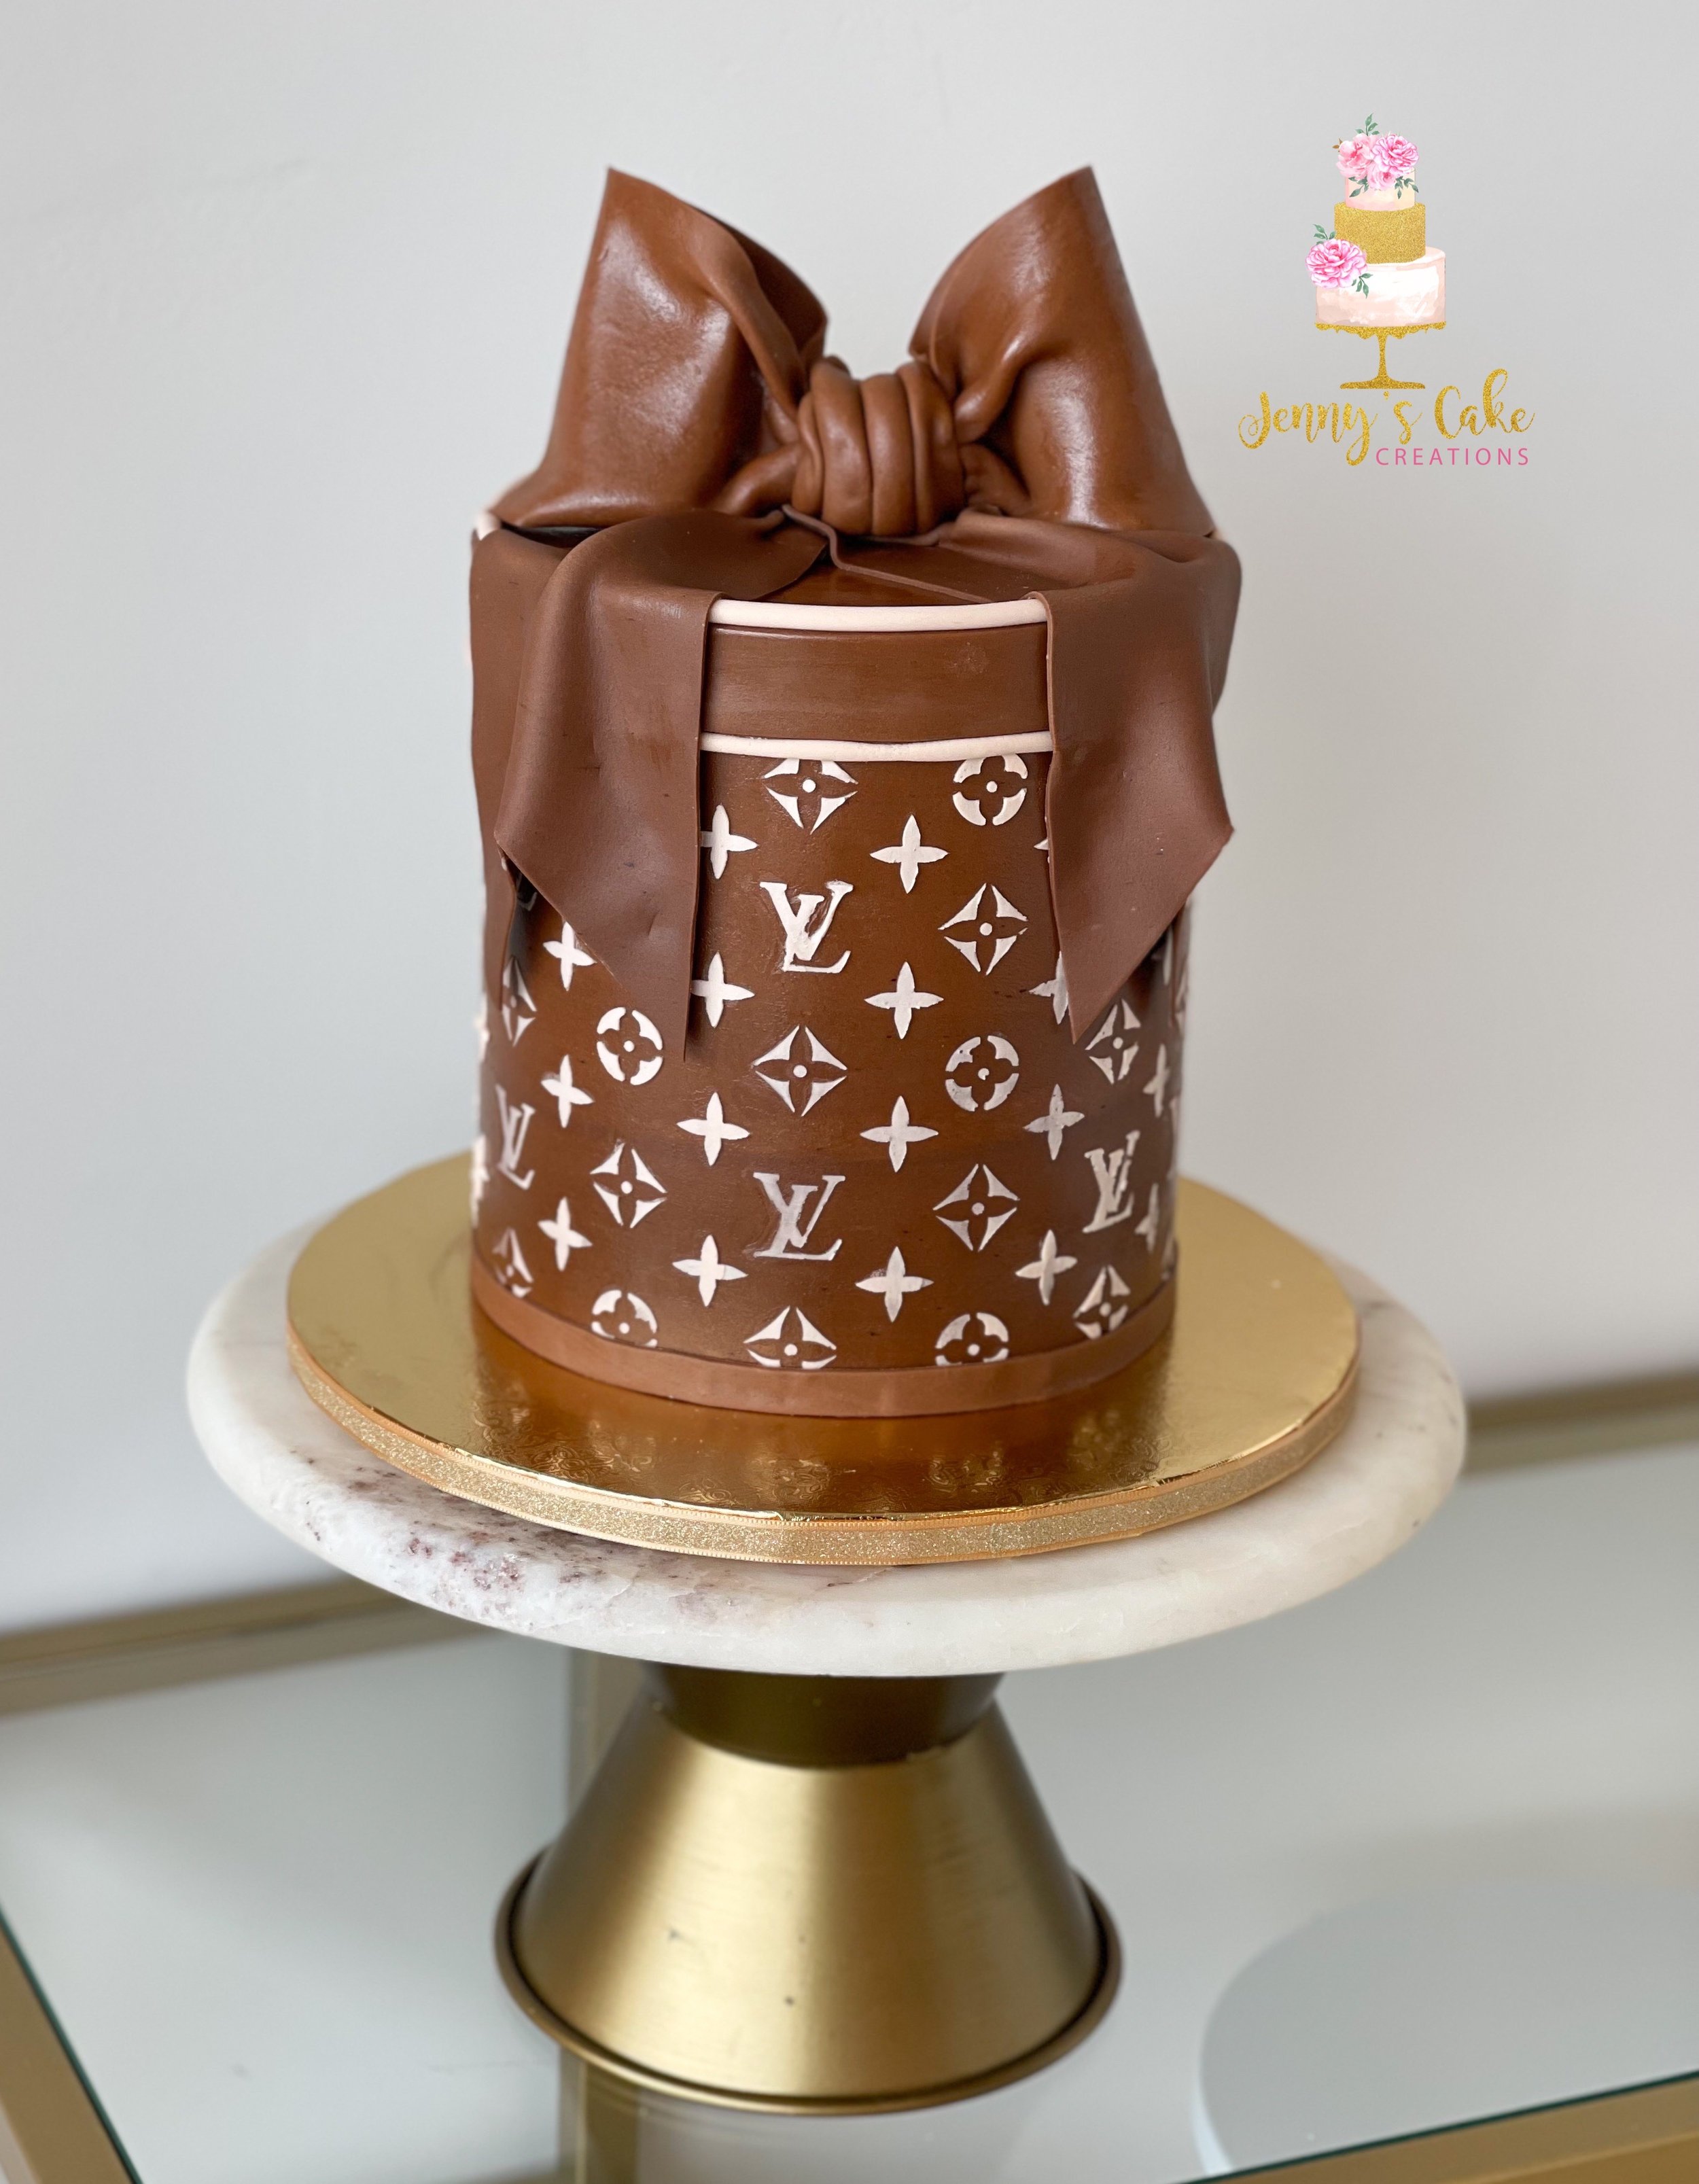 Louis Vuitton Themed Cake For A Girl - Chocolate Frills